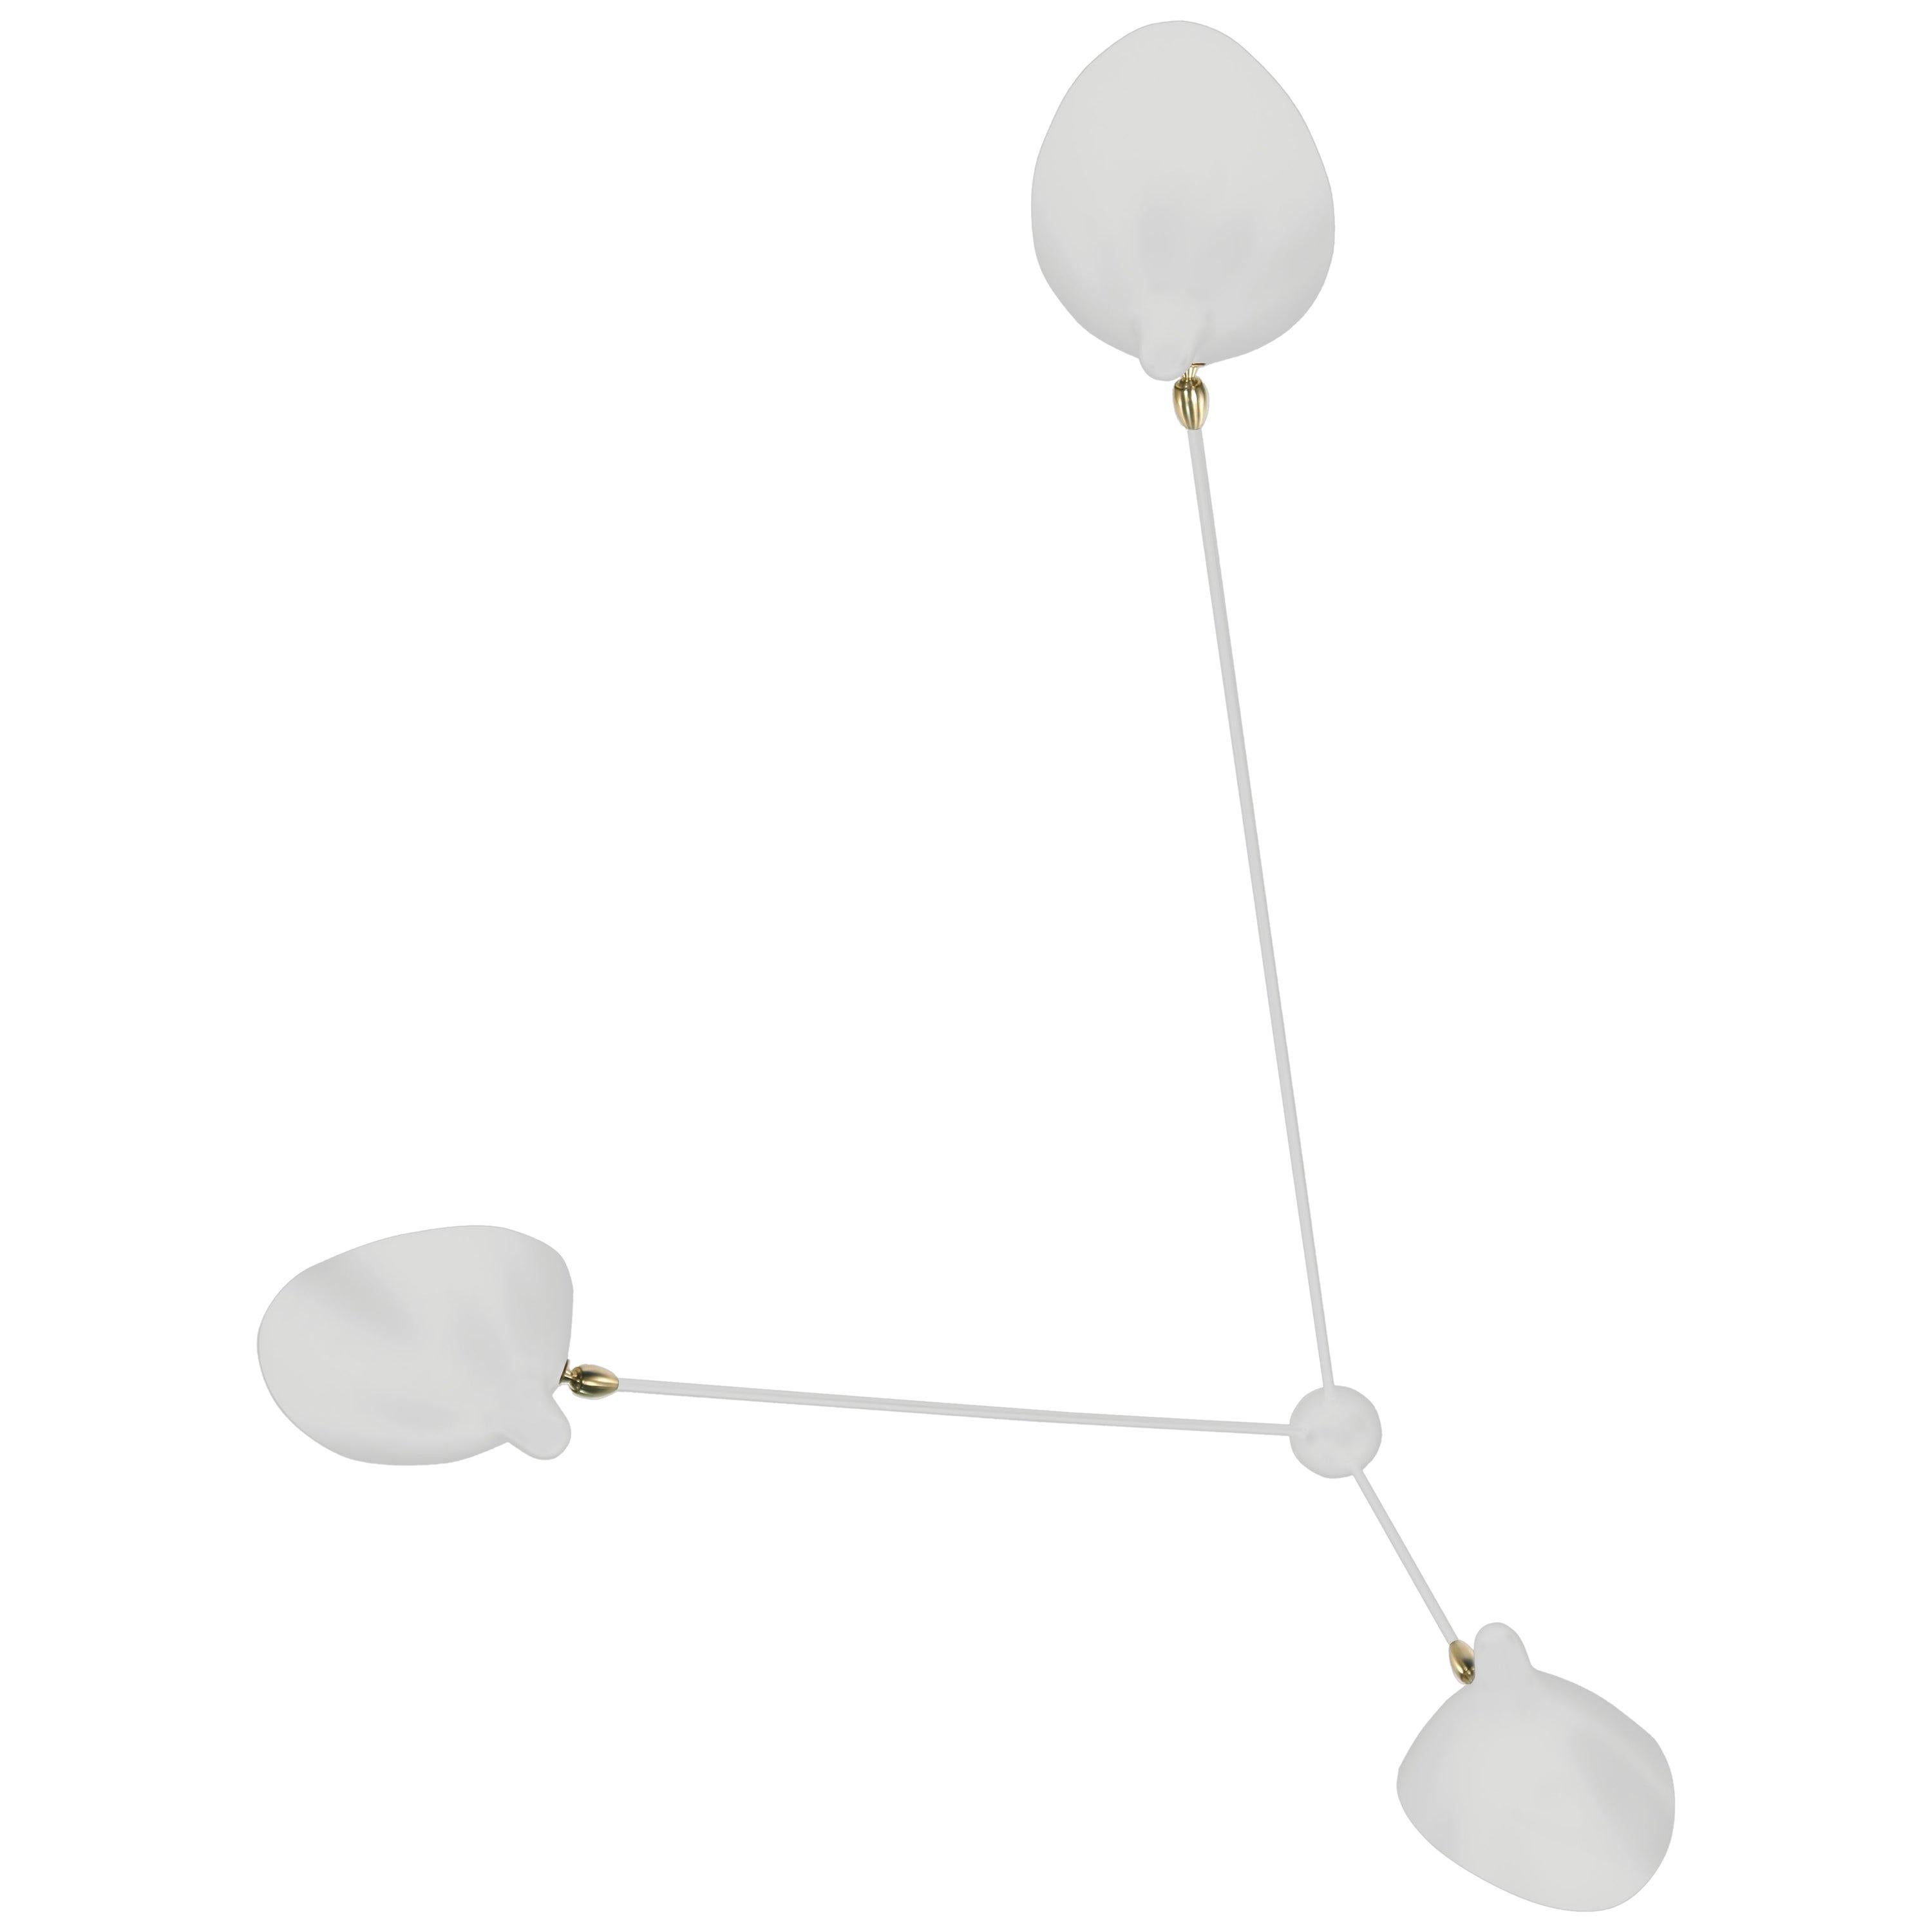 Serge Mouille Mid-Century Modern White Three Fixed Arms Spider Ceiling Lamp